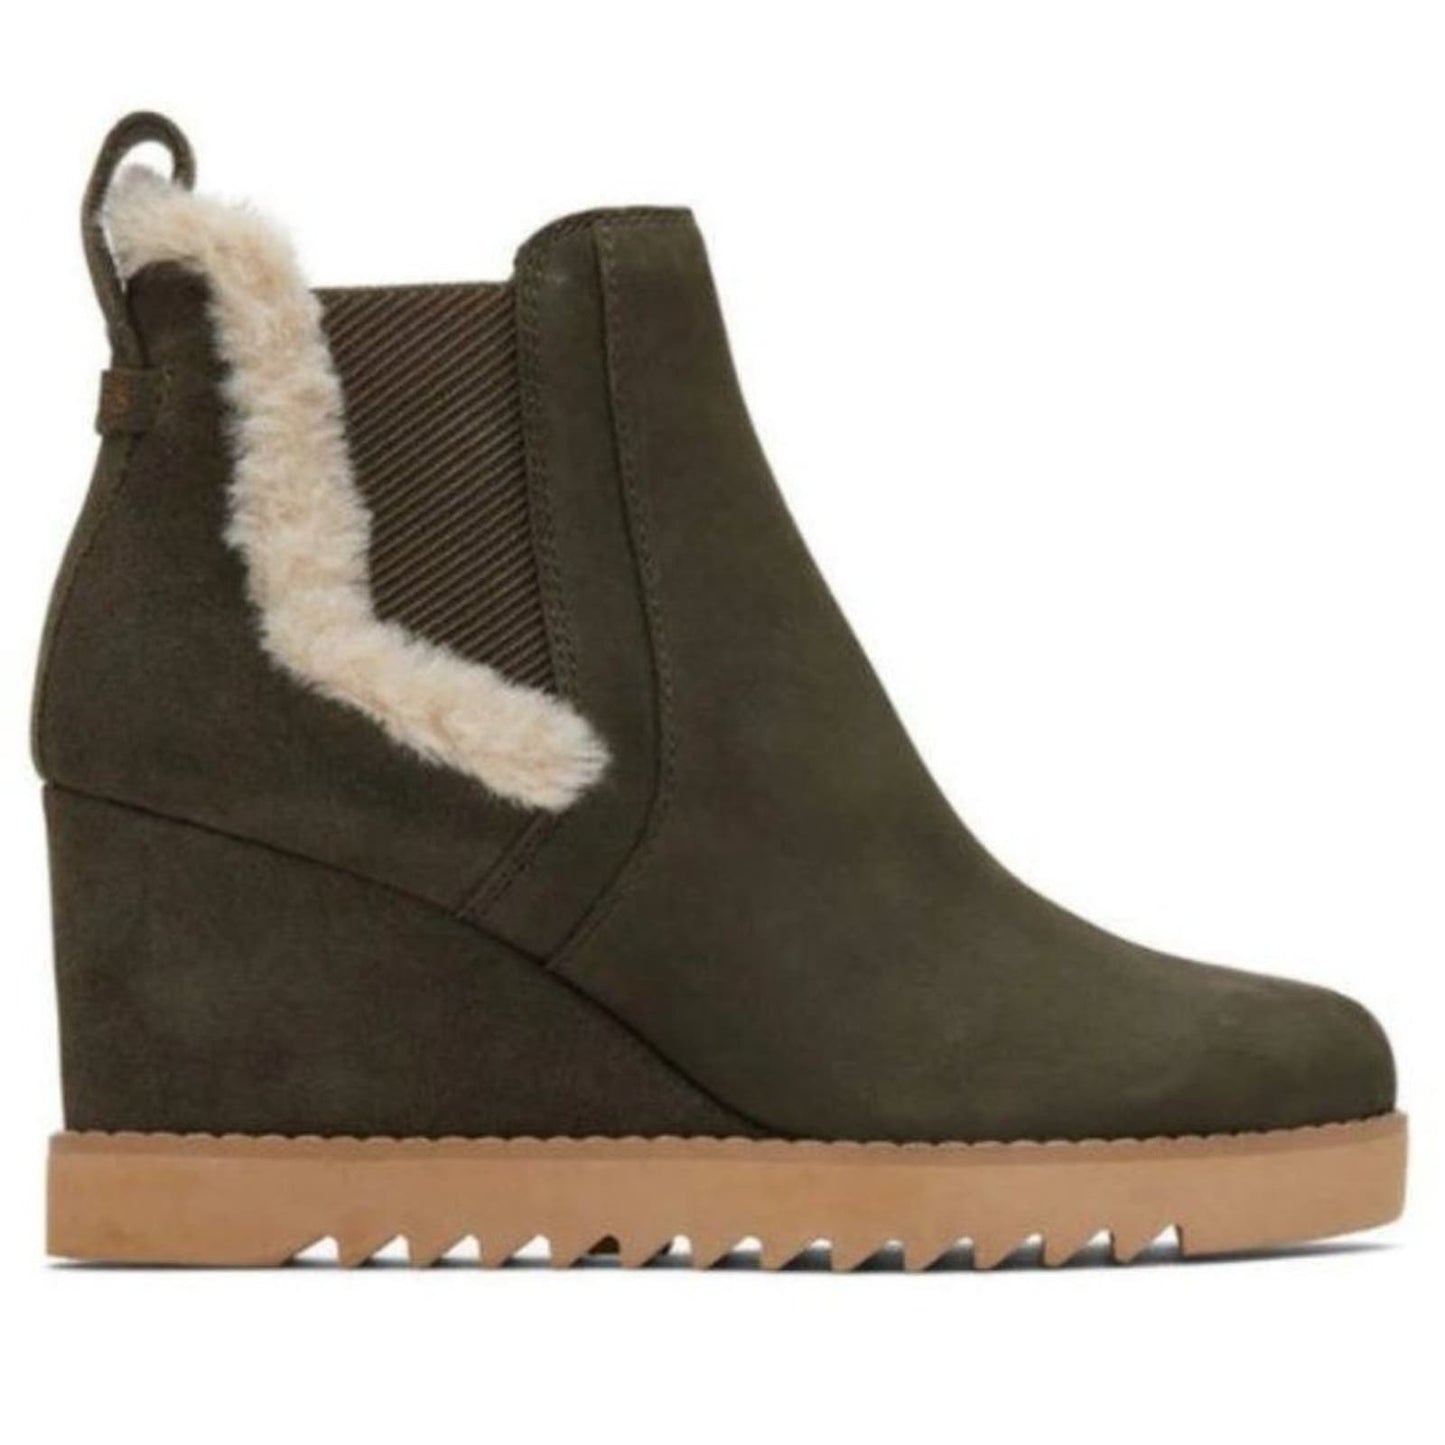 TOM'S Maddie Olive Nubuck Wedge Boot in Tarmac Olive NEW no box Size 8.5